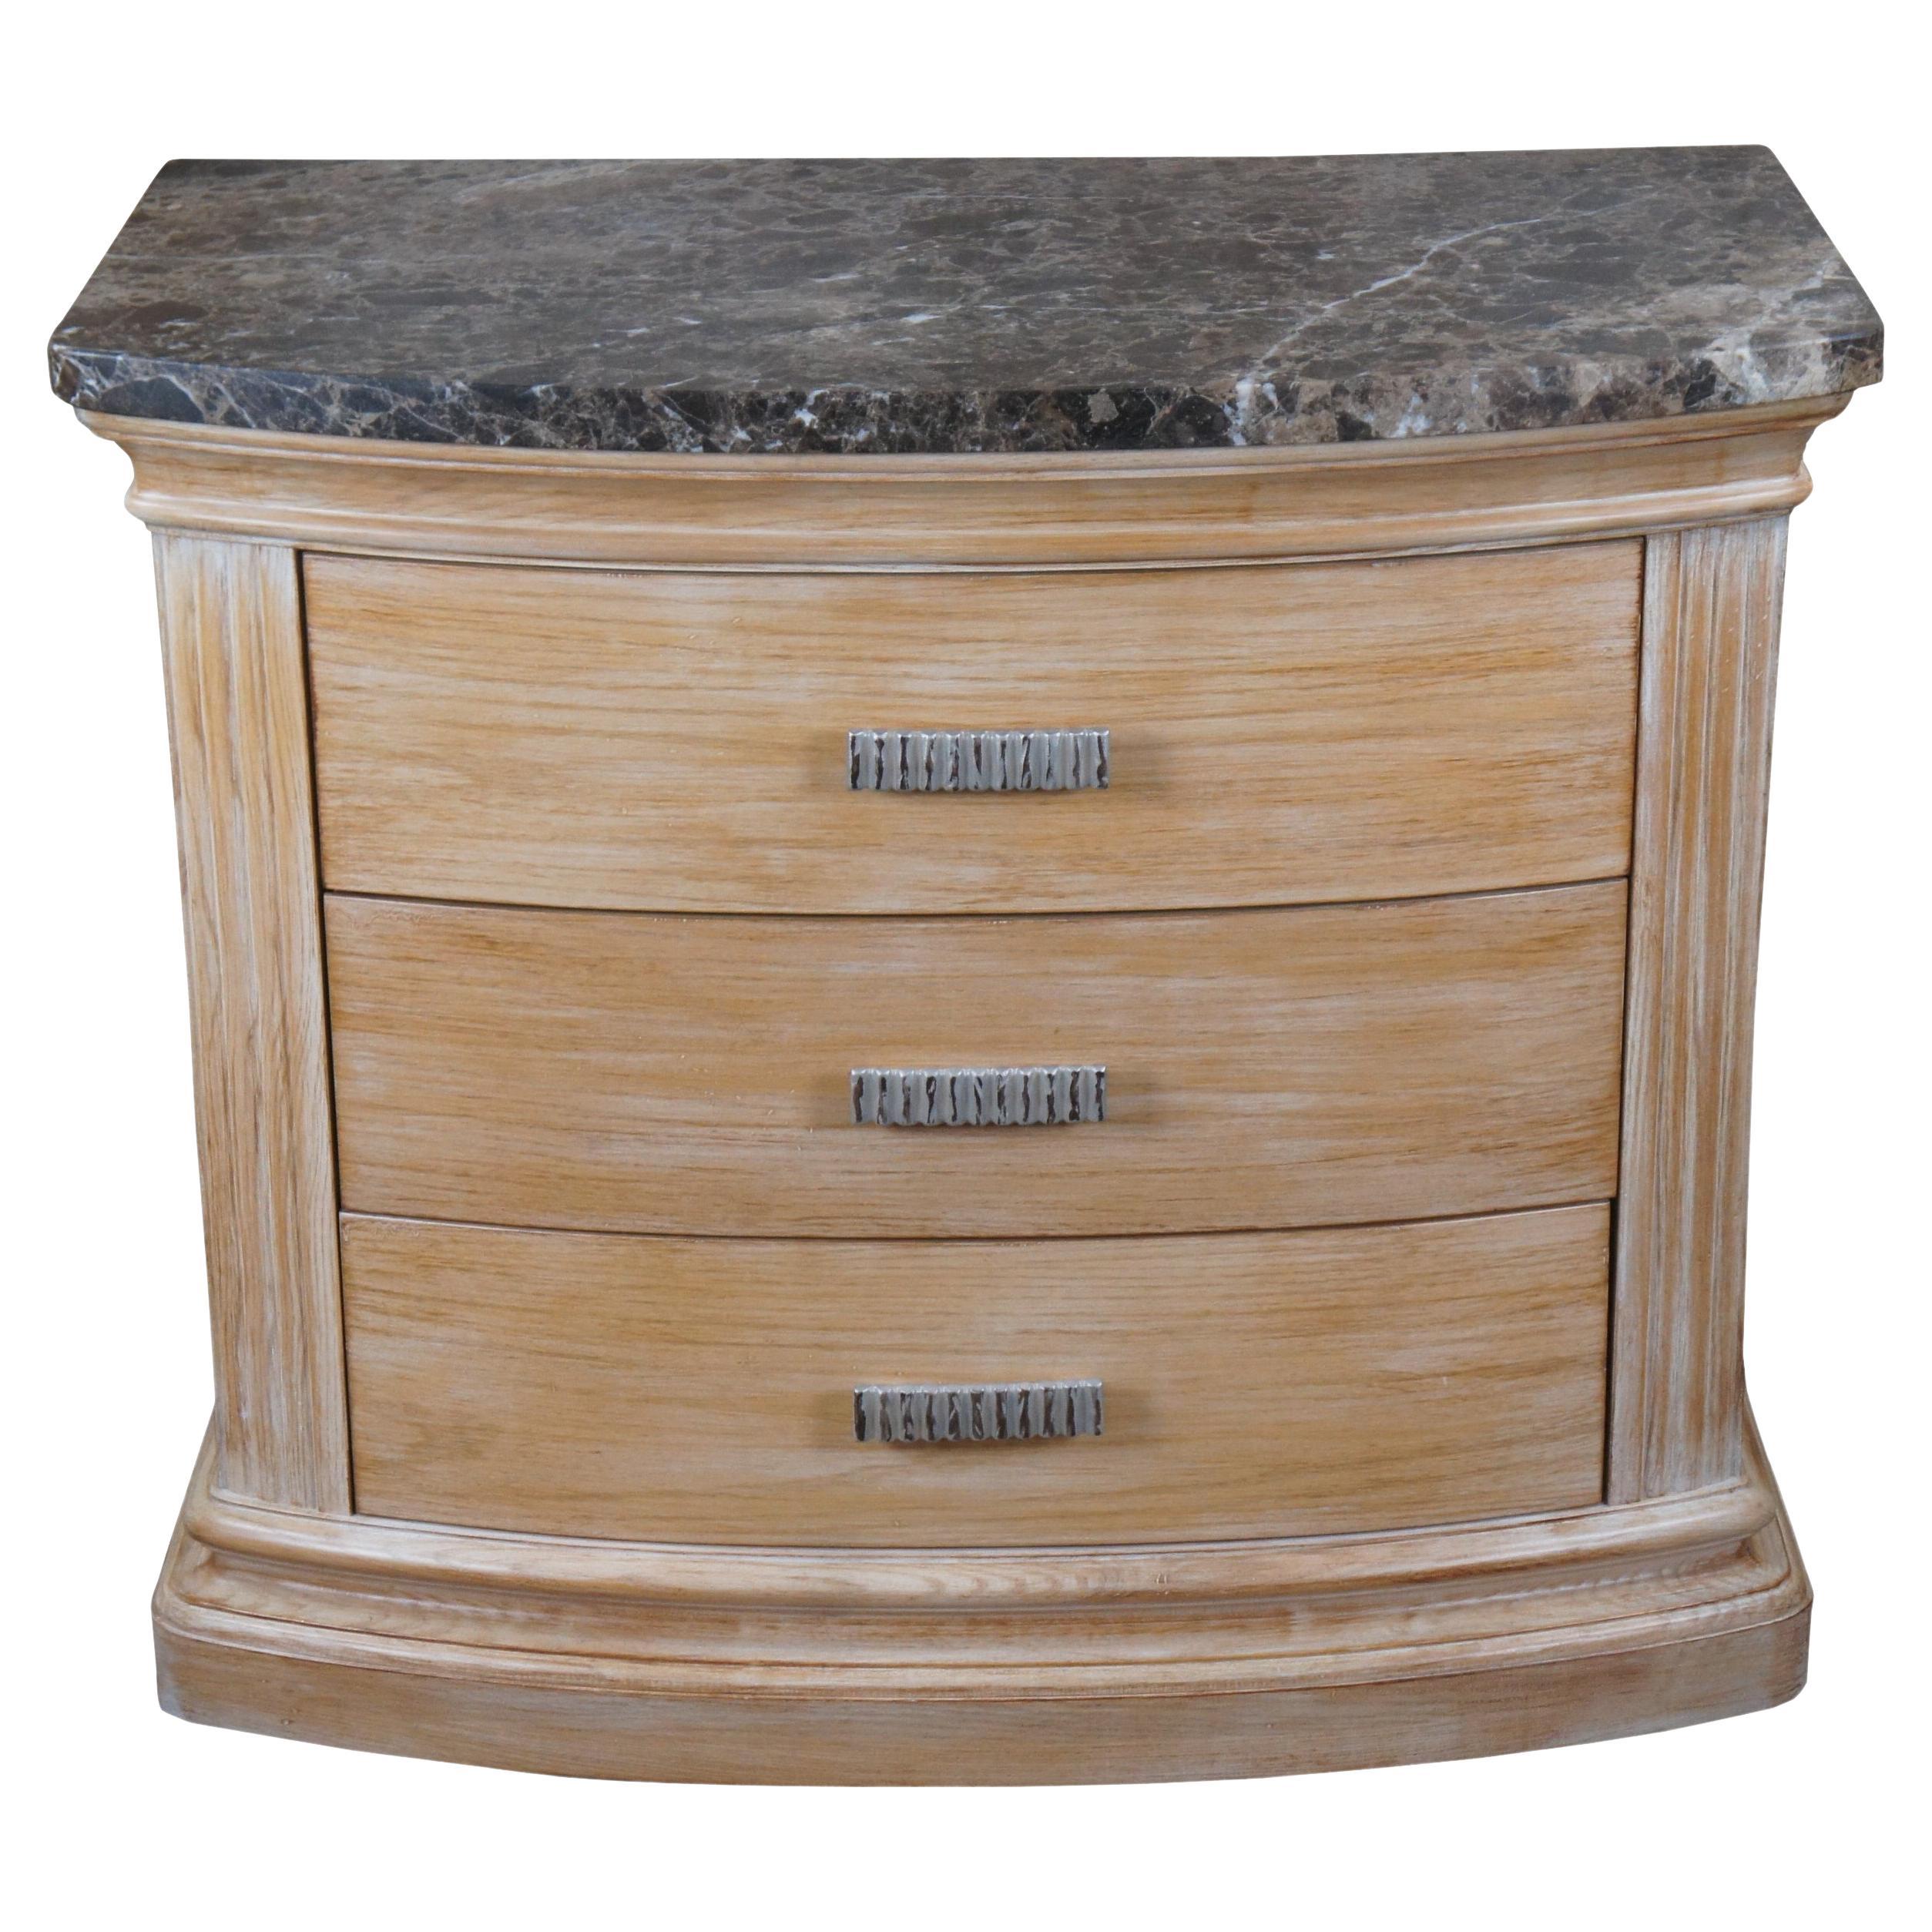 Hickory White Odyssey Picked Oak Demilune 3 Drawer Granite Top Chest Nightstand